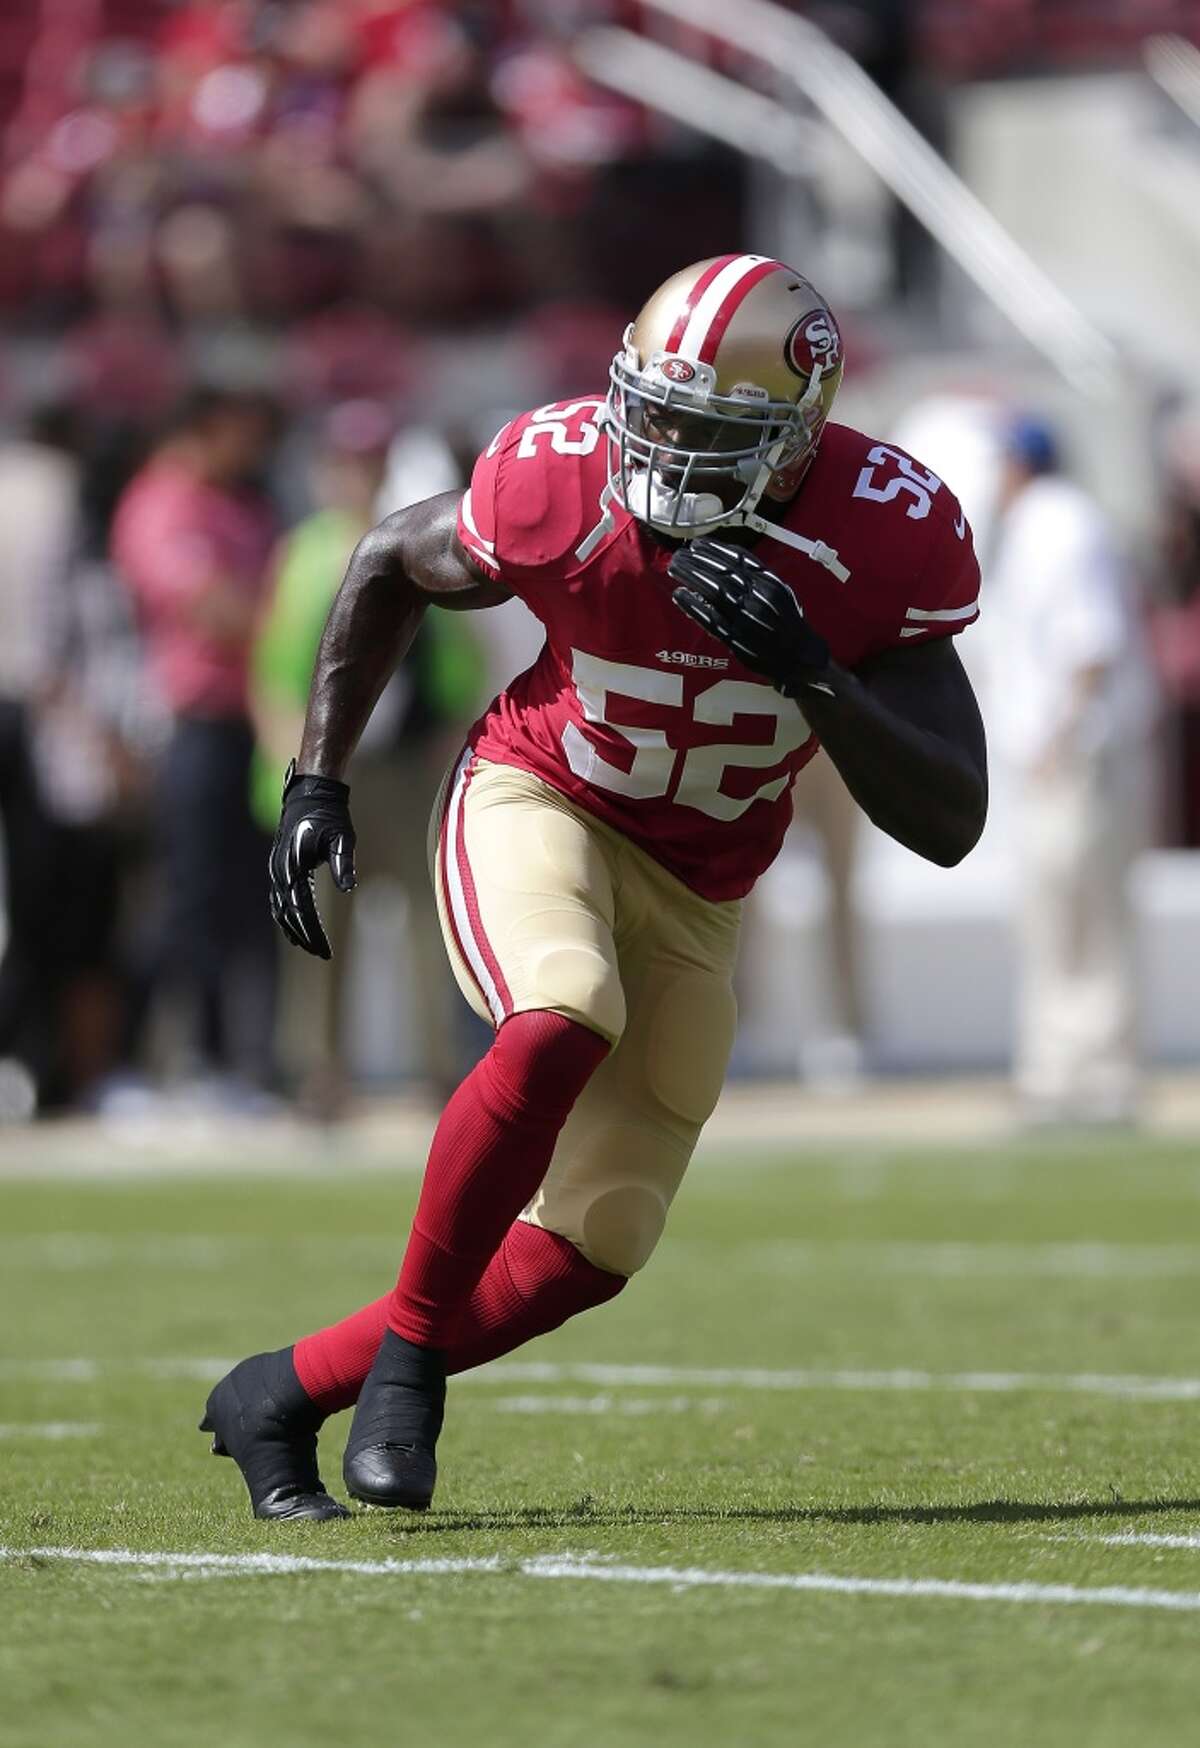 Patrick Willis I Am Here To Do The Work That My Father Sent Me To Do